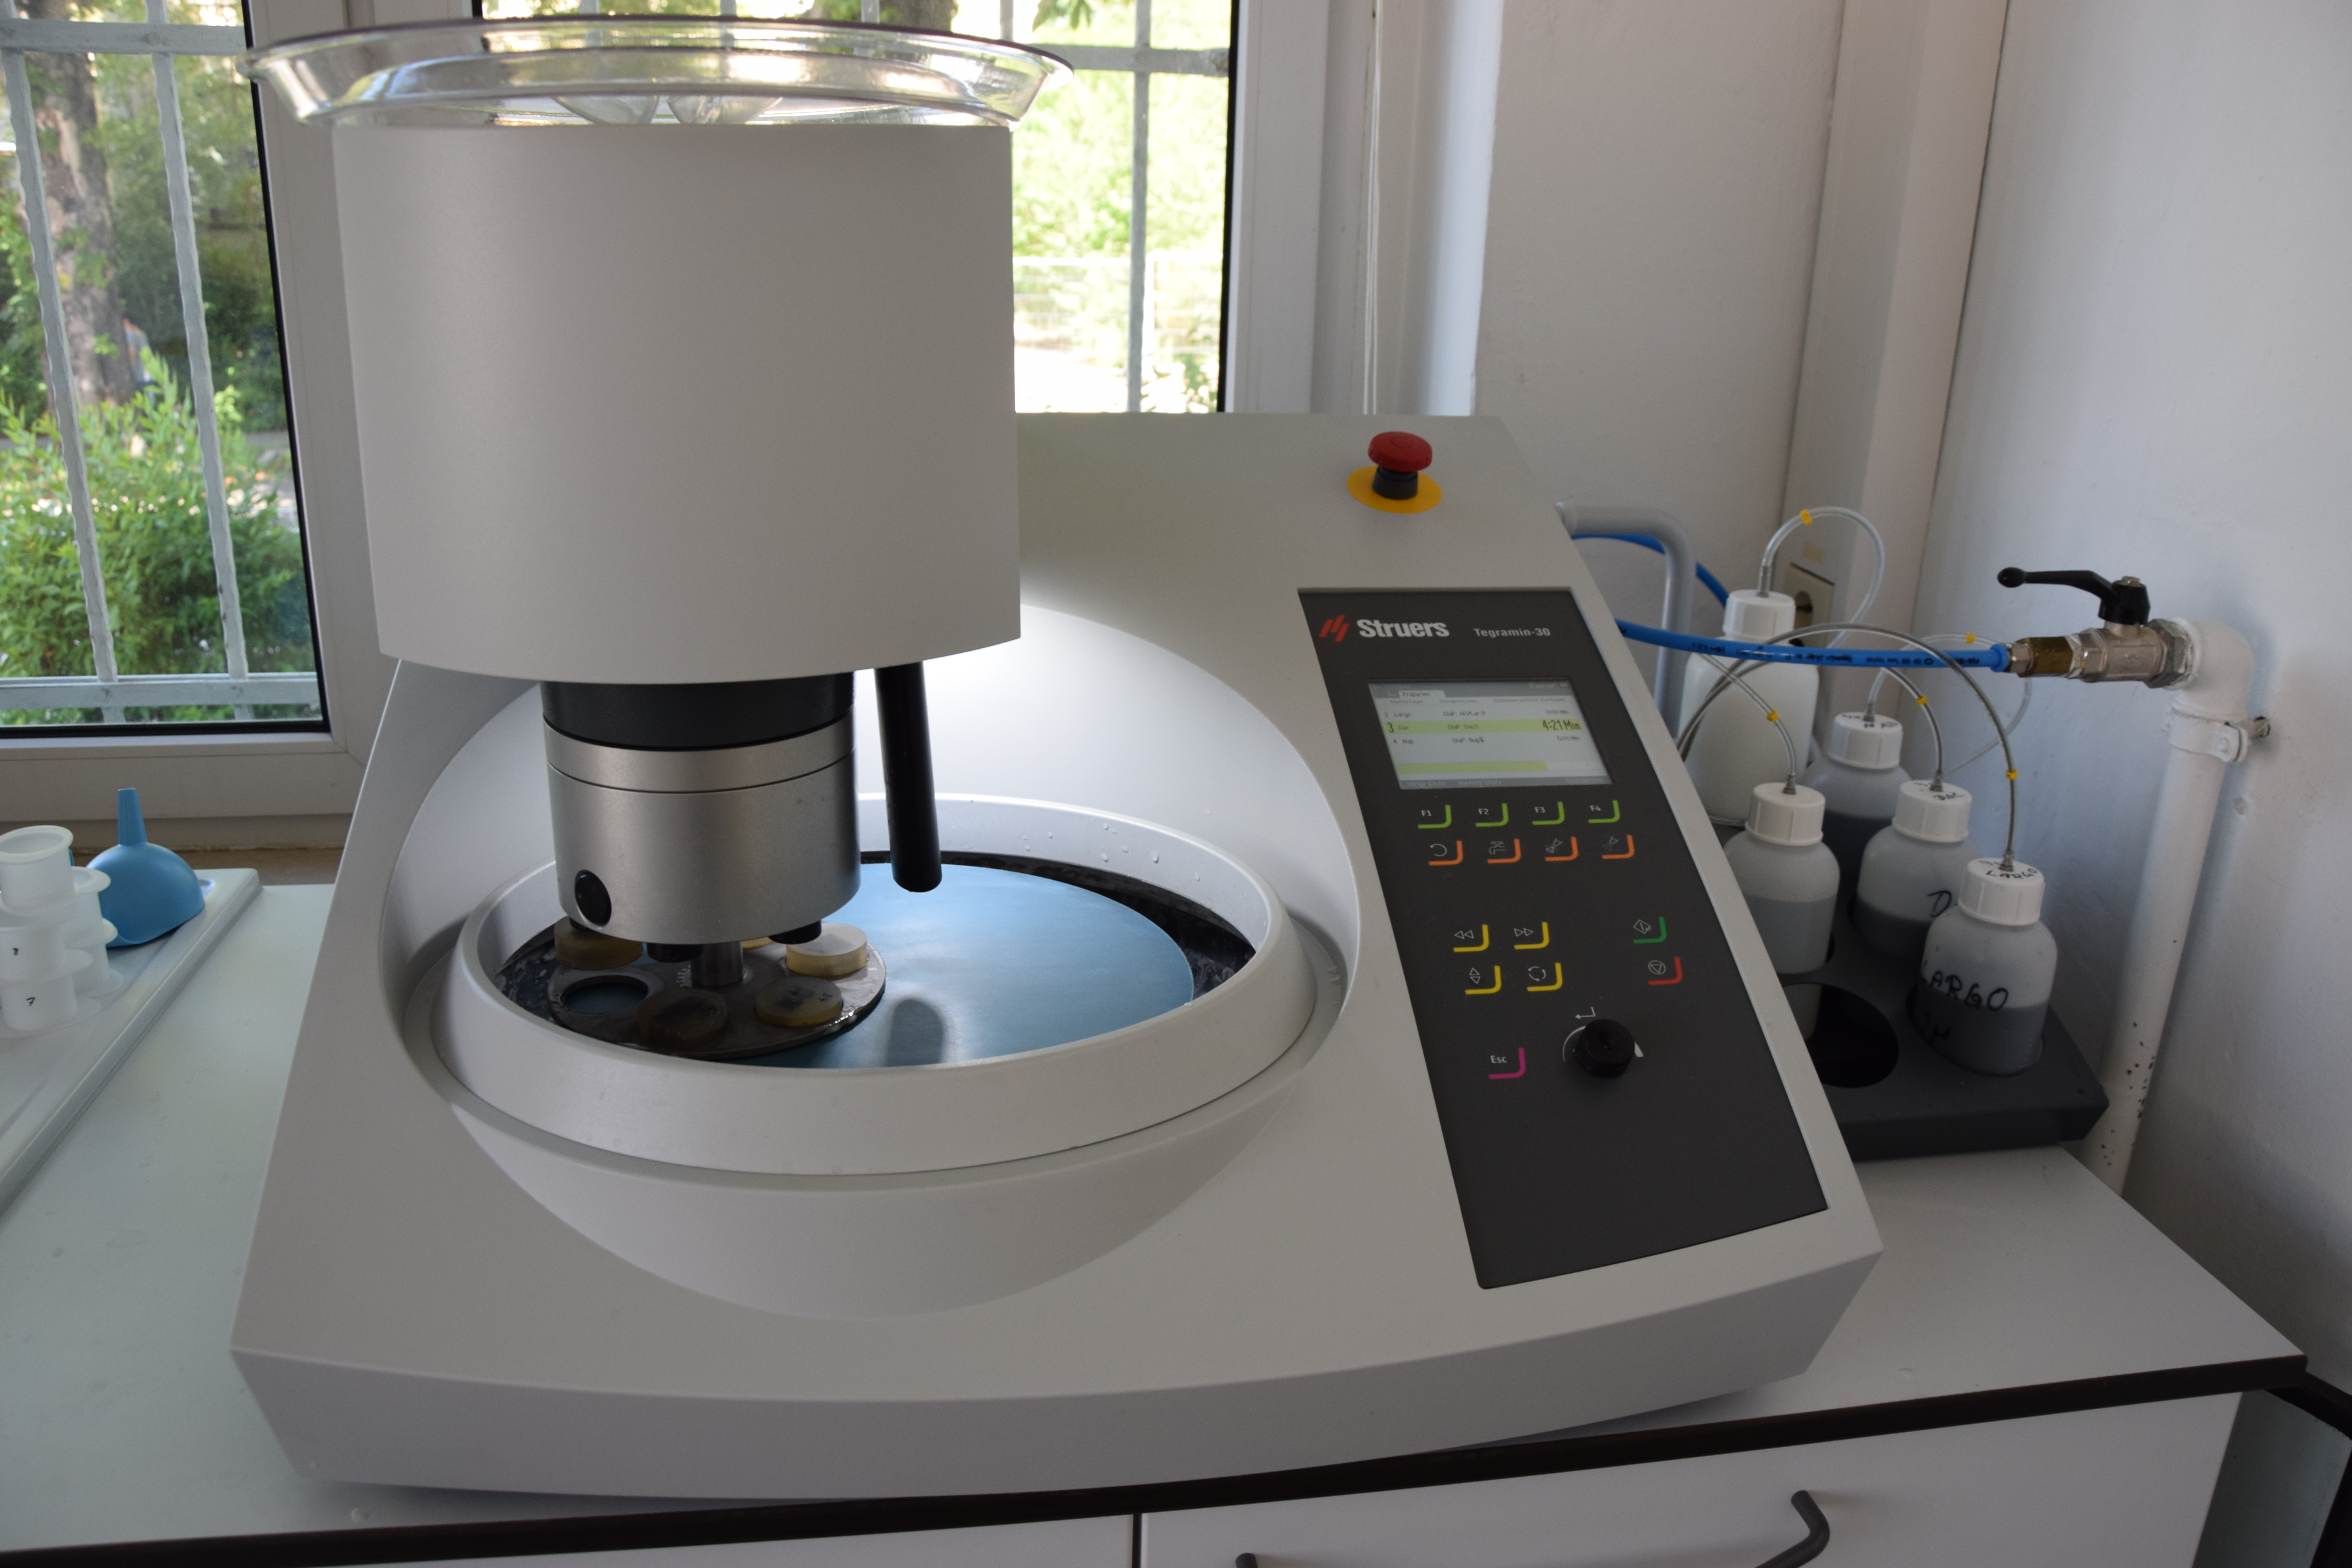 The picture shows the grinding and polishing device Tegramin-30 from Struers in the institute's technical centre.